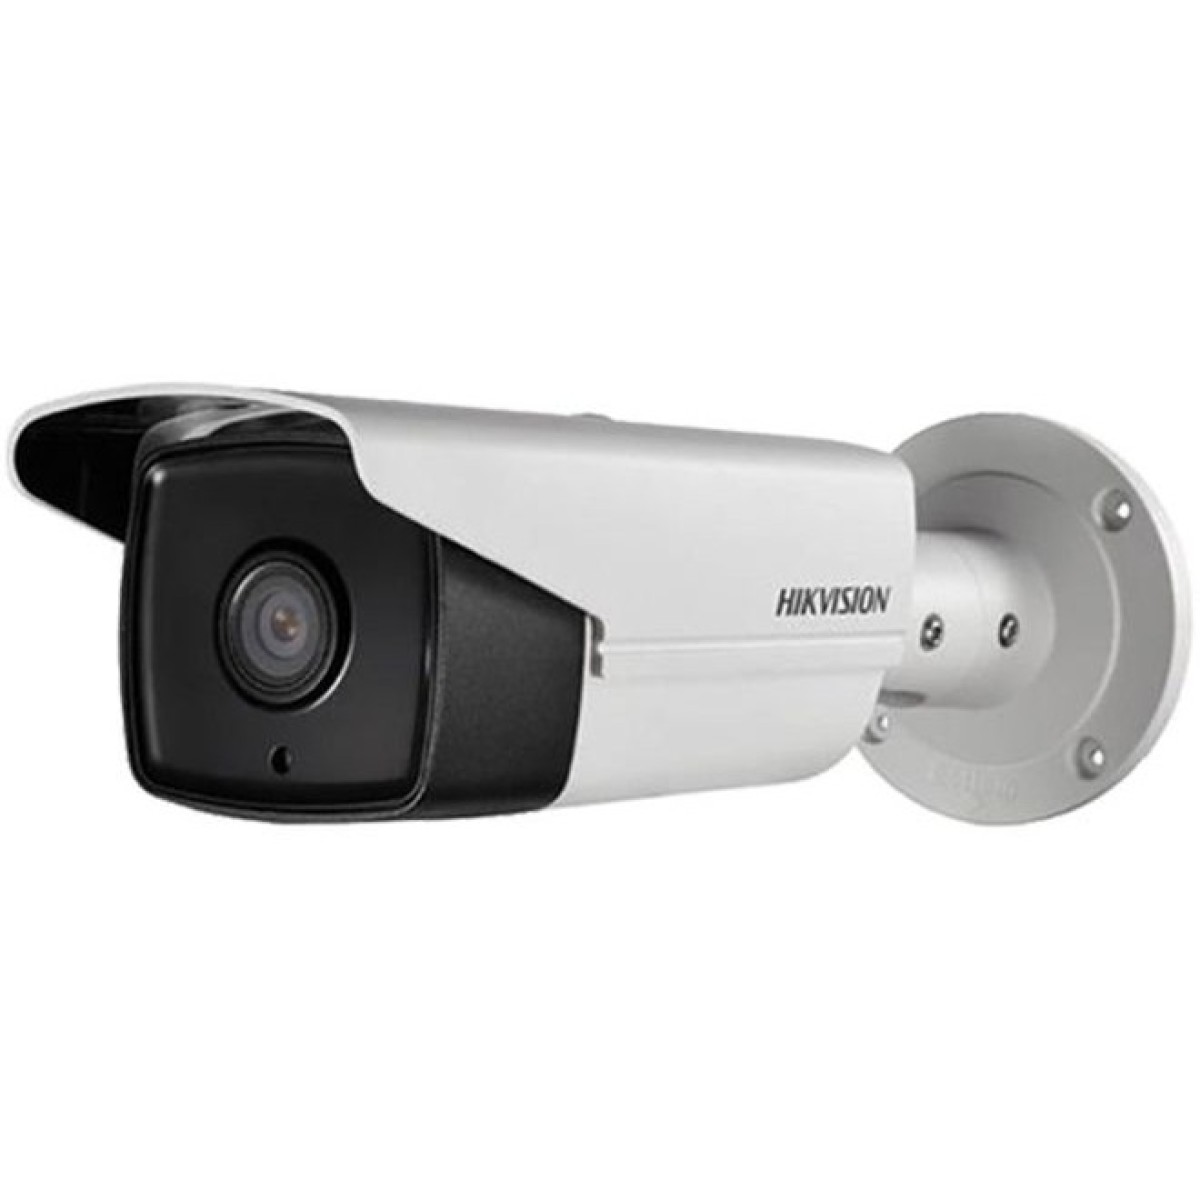 IP-камера Hikvision DS-2CD2T85FWD-I8 (2.8) 98_98.jpg